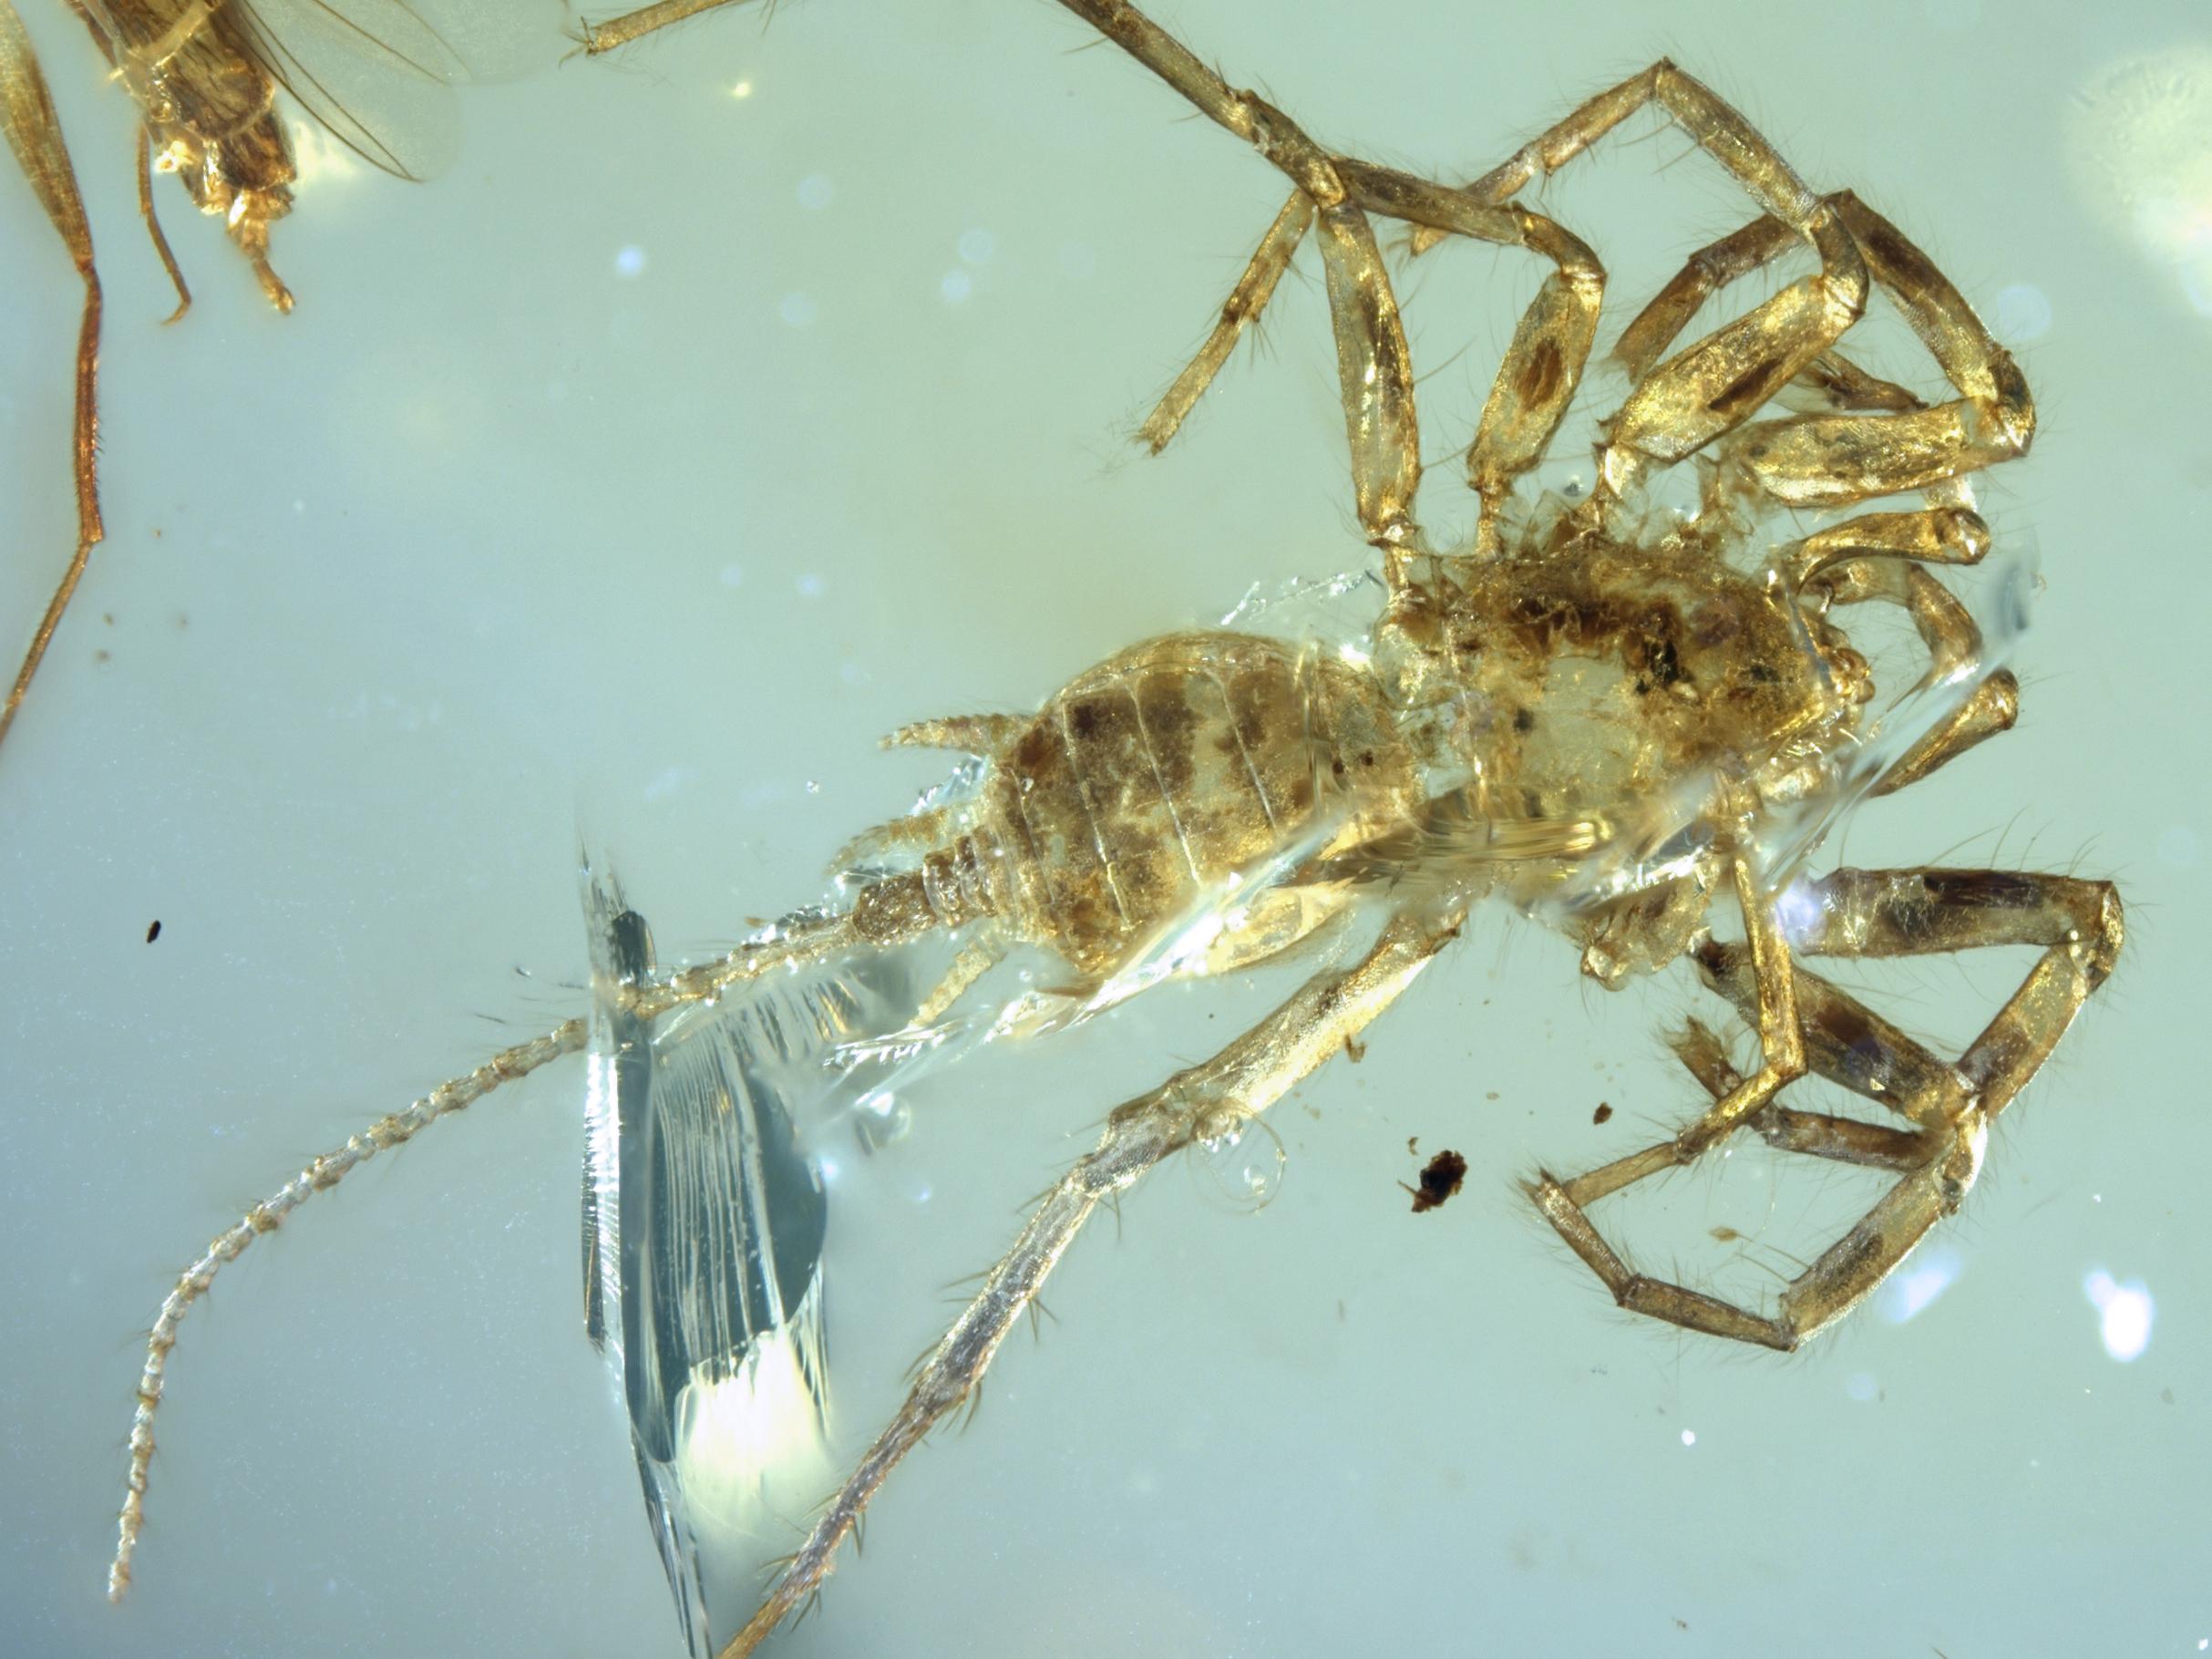 Spider-like creature with a tail found preserved in 100 million year ...